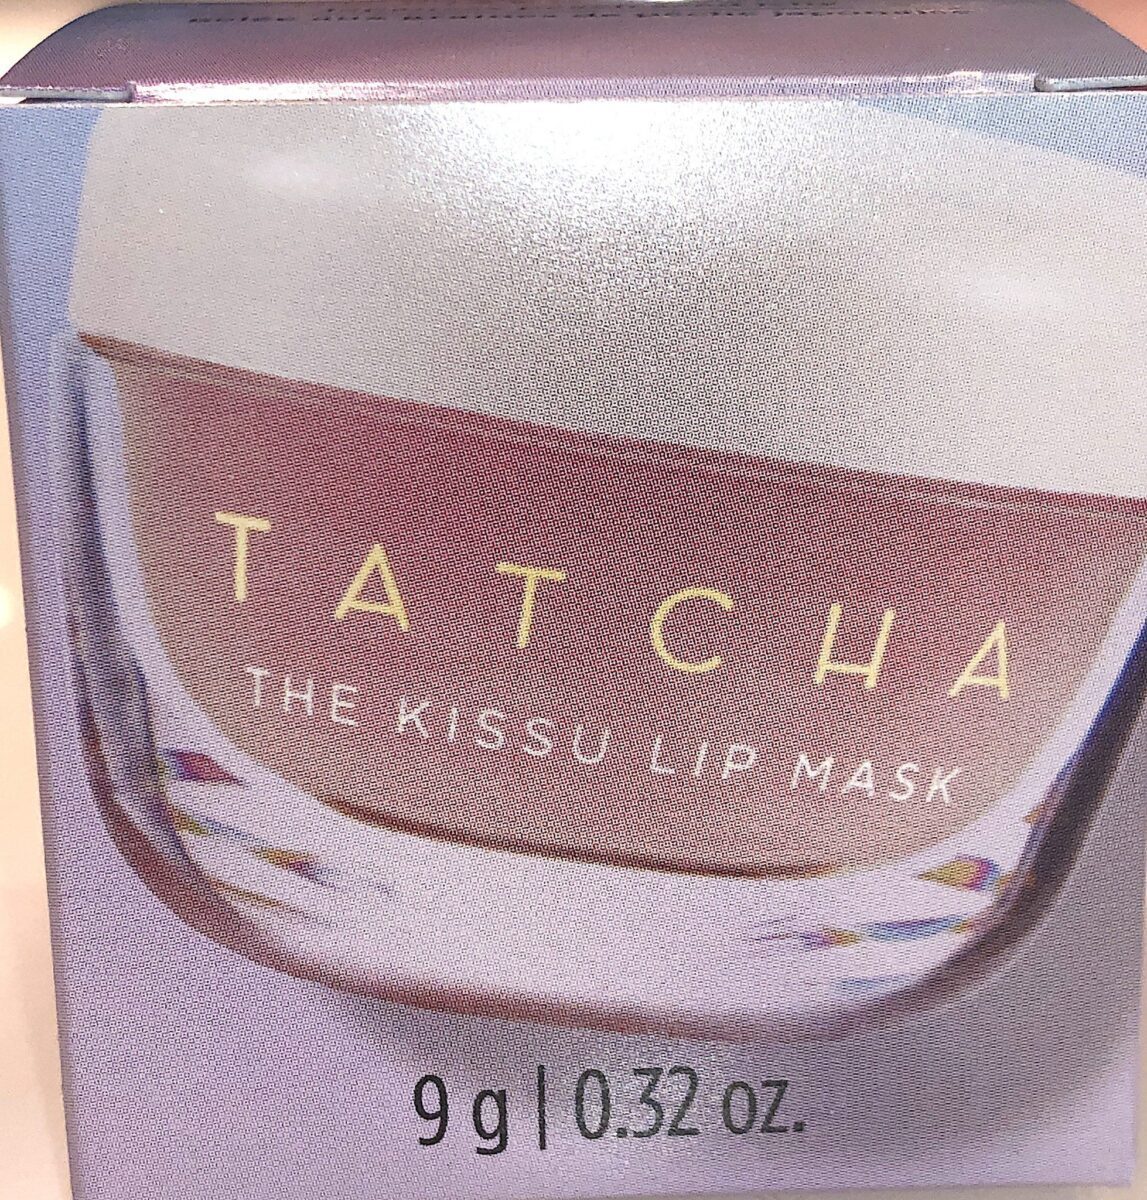 THE OUTER BOX FOR THE TATCHA KISSU LIP MASK